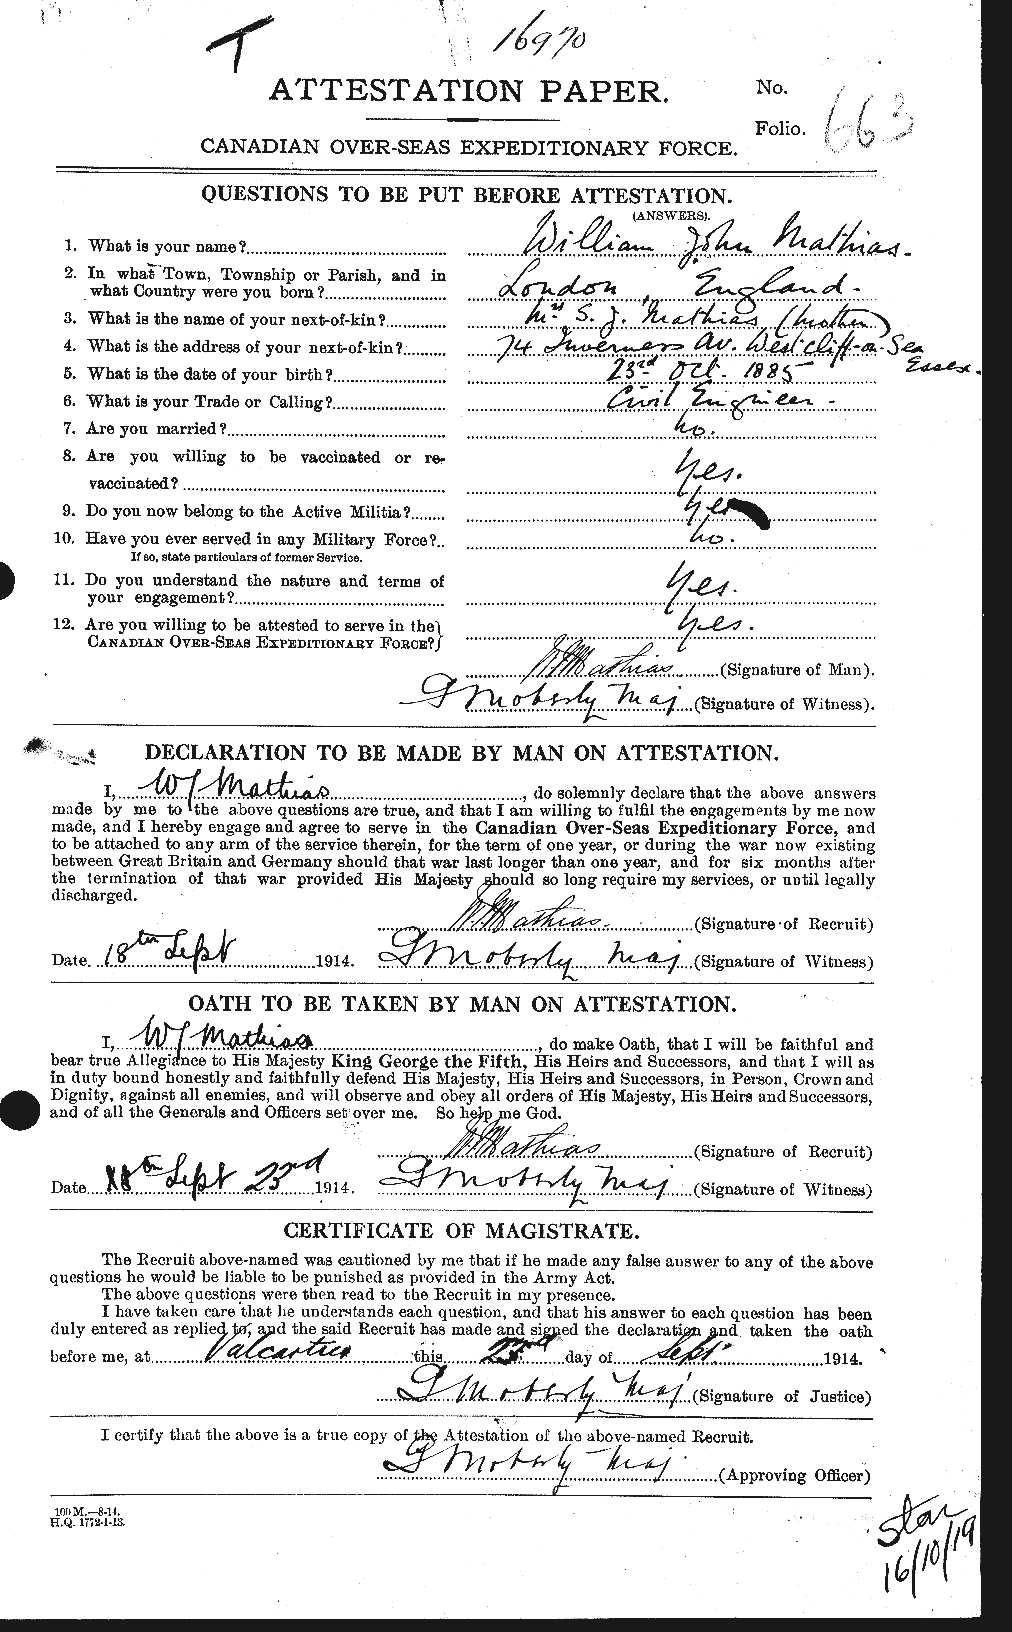 Personnel Records of the First World War - CEF 483760a